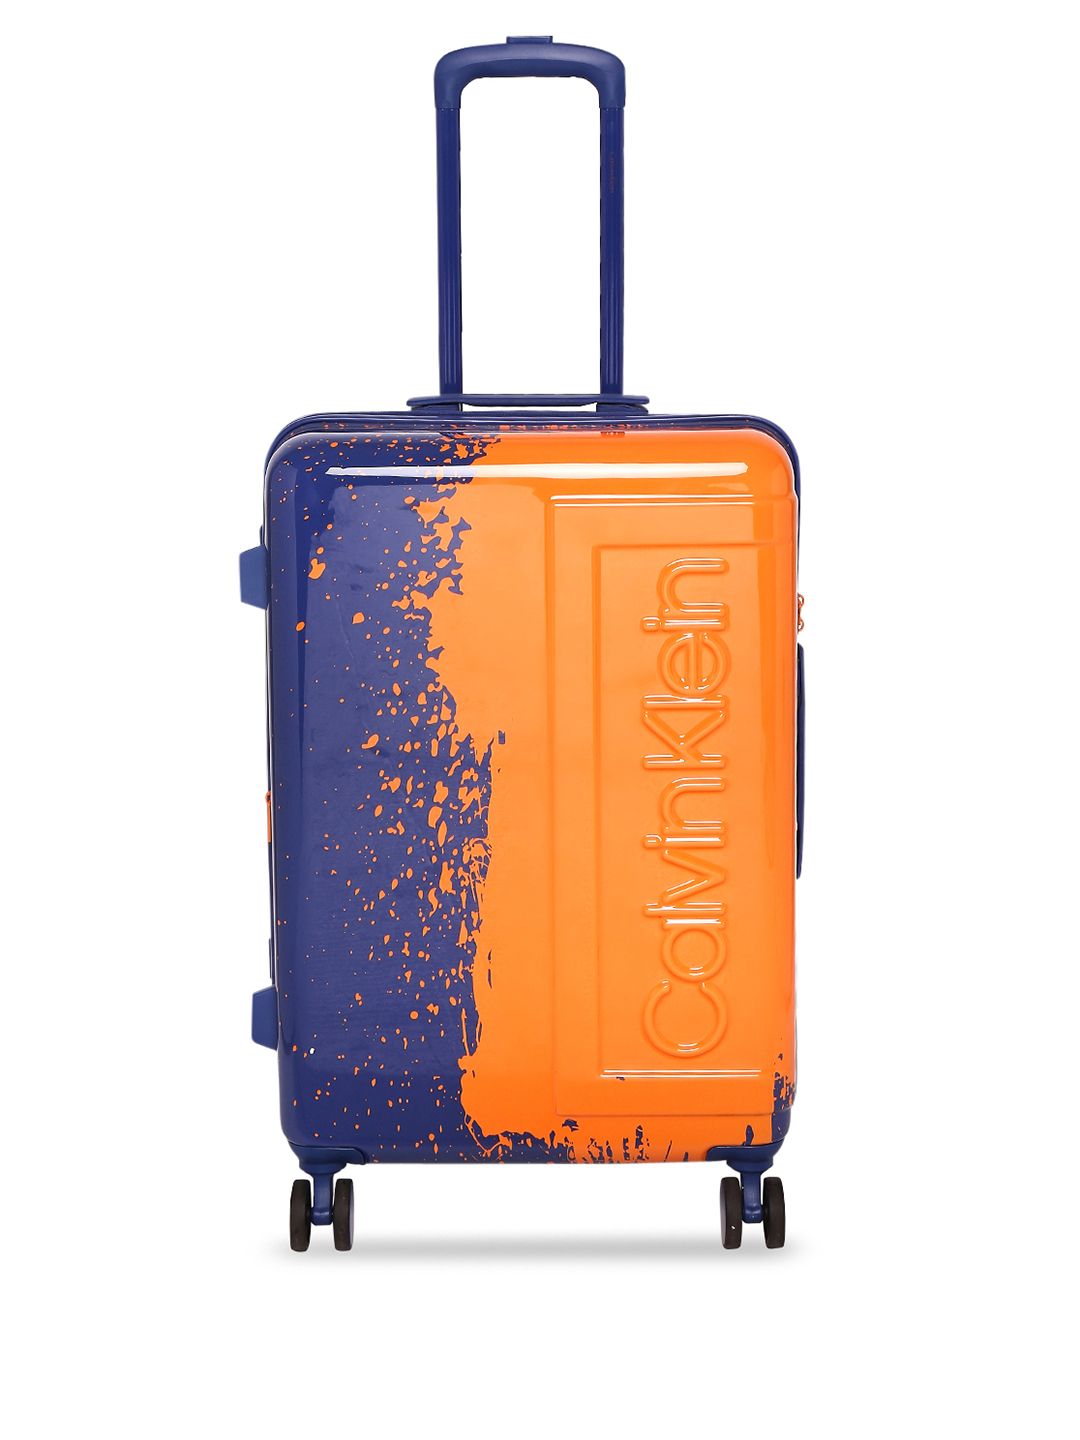 Calvin Klein Blue & Orange Textured The Factory Hard-Sided Medium Trolley Suitcase Price in India